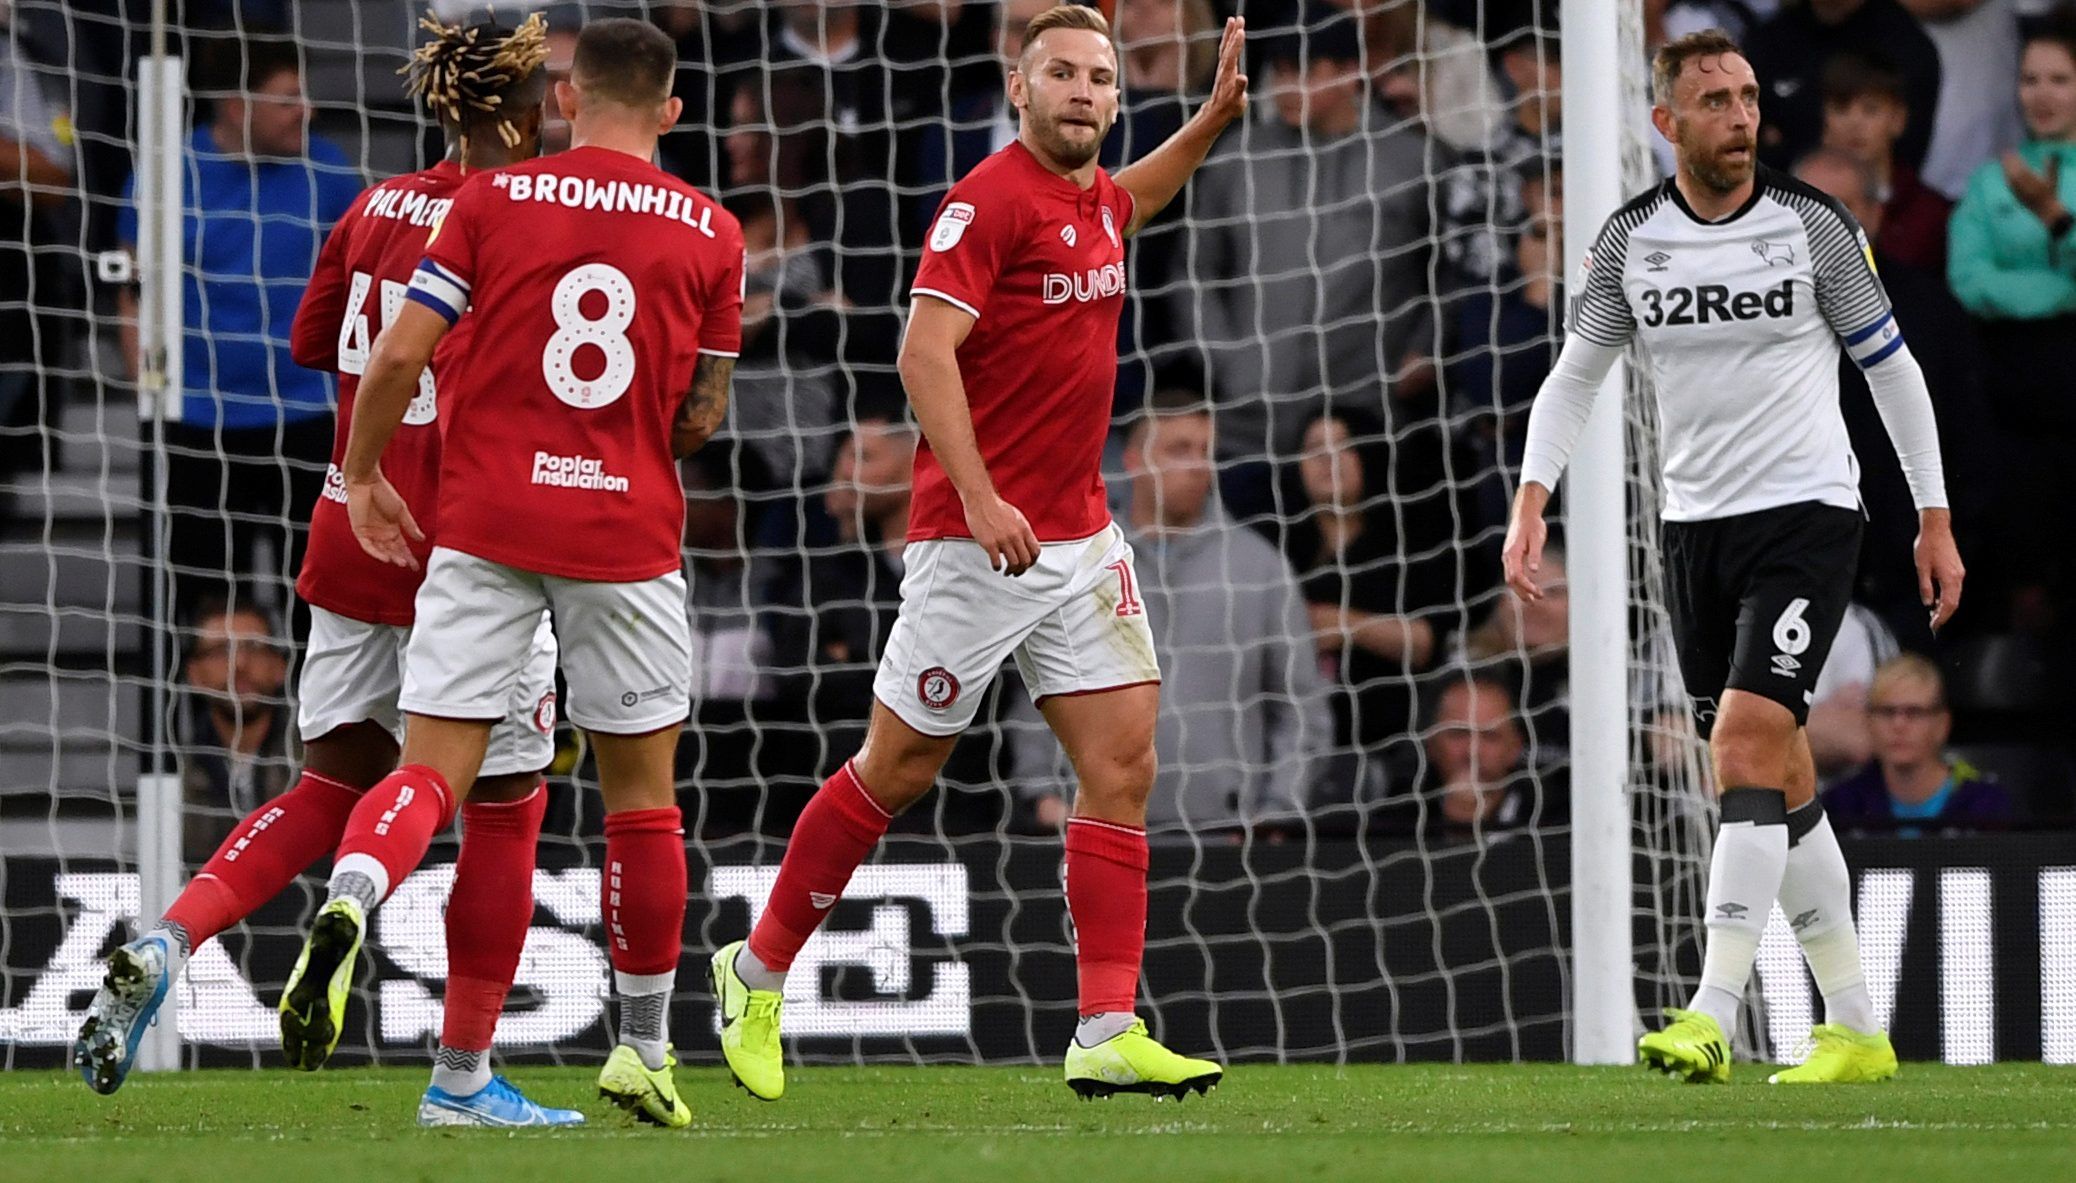 Soccer Football - Championship - Derby County v Bristol City - Pride Park, Derby, Britain - August 20, 2019  Bristol City's Andreas Weimann celebrates scoring their first goal  Action Images/Tony O'Brien   EDITORIAL USE ONLY. No use with unauthorized audio, video, data, fixture lists, club/league logos or 